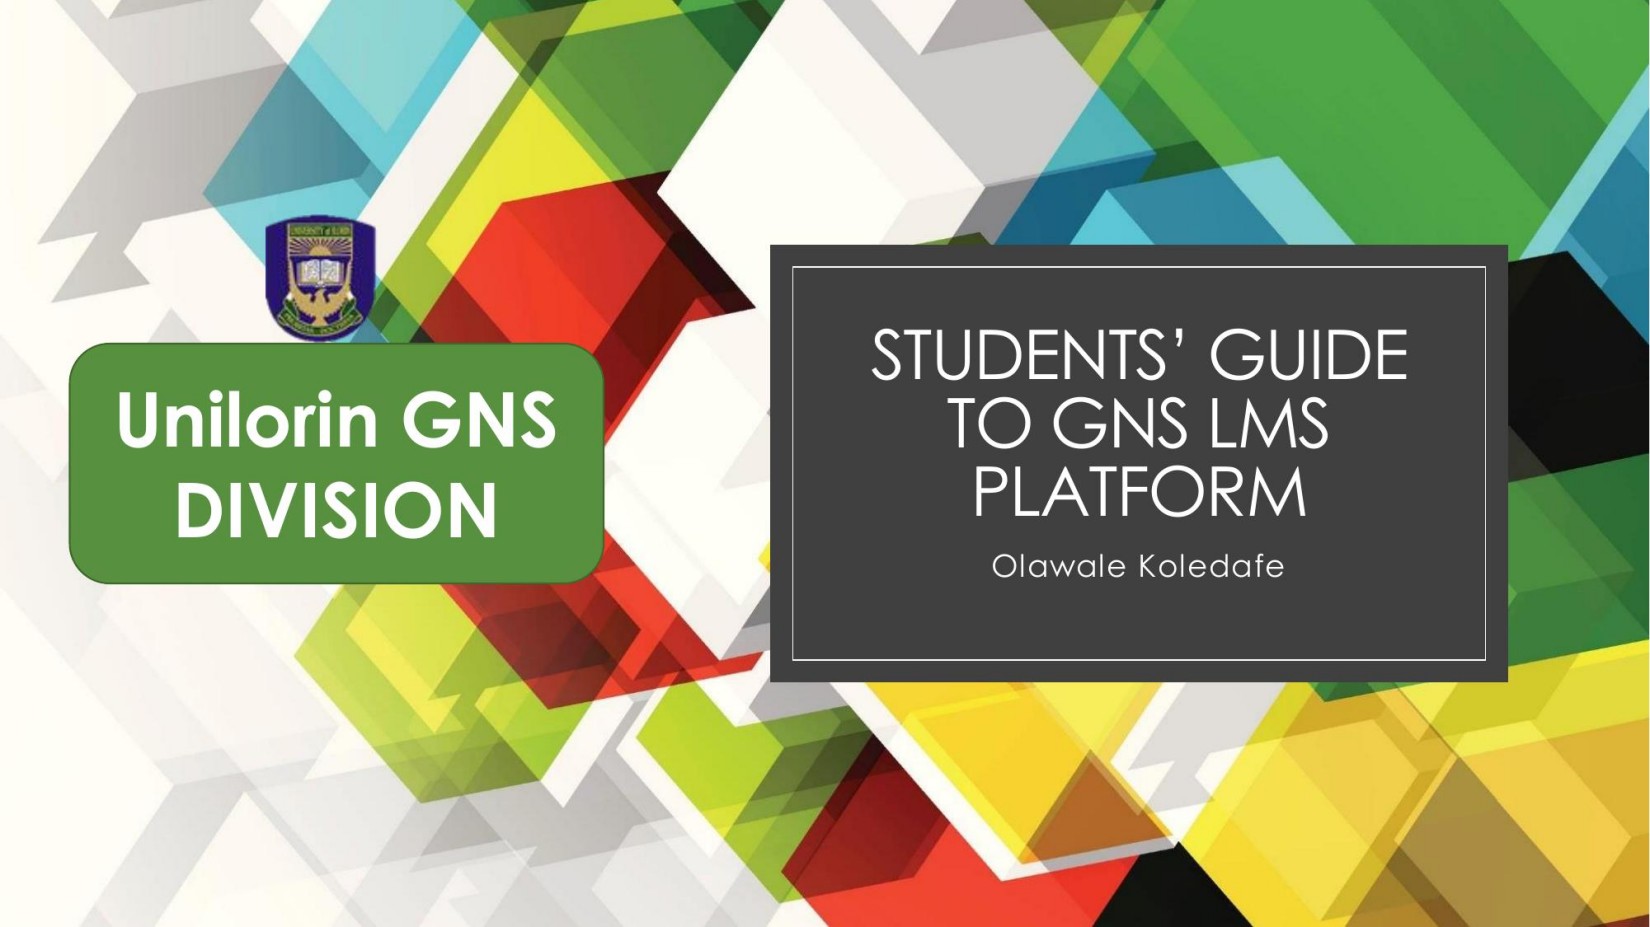 Students’ guide to GNS LMS Platform 2021